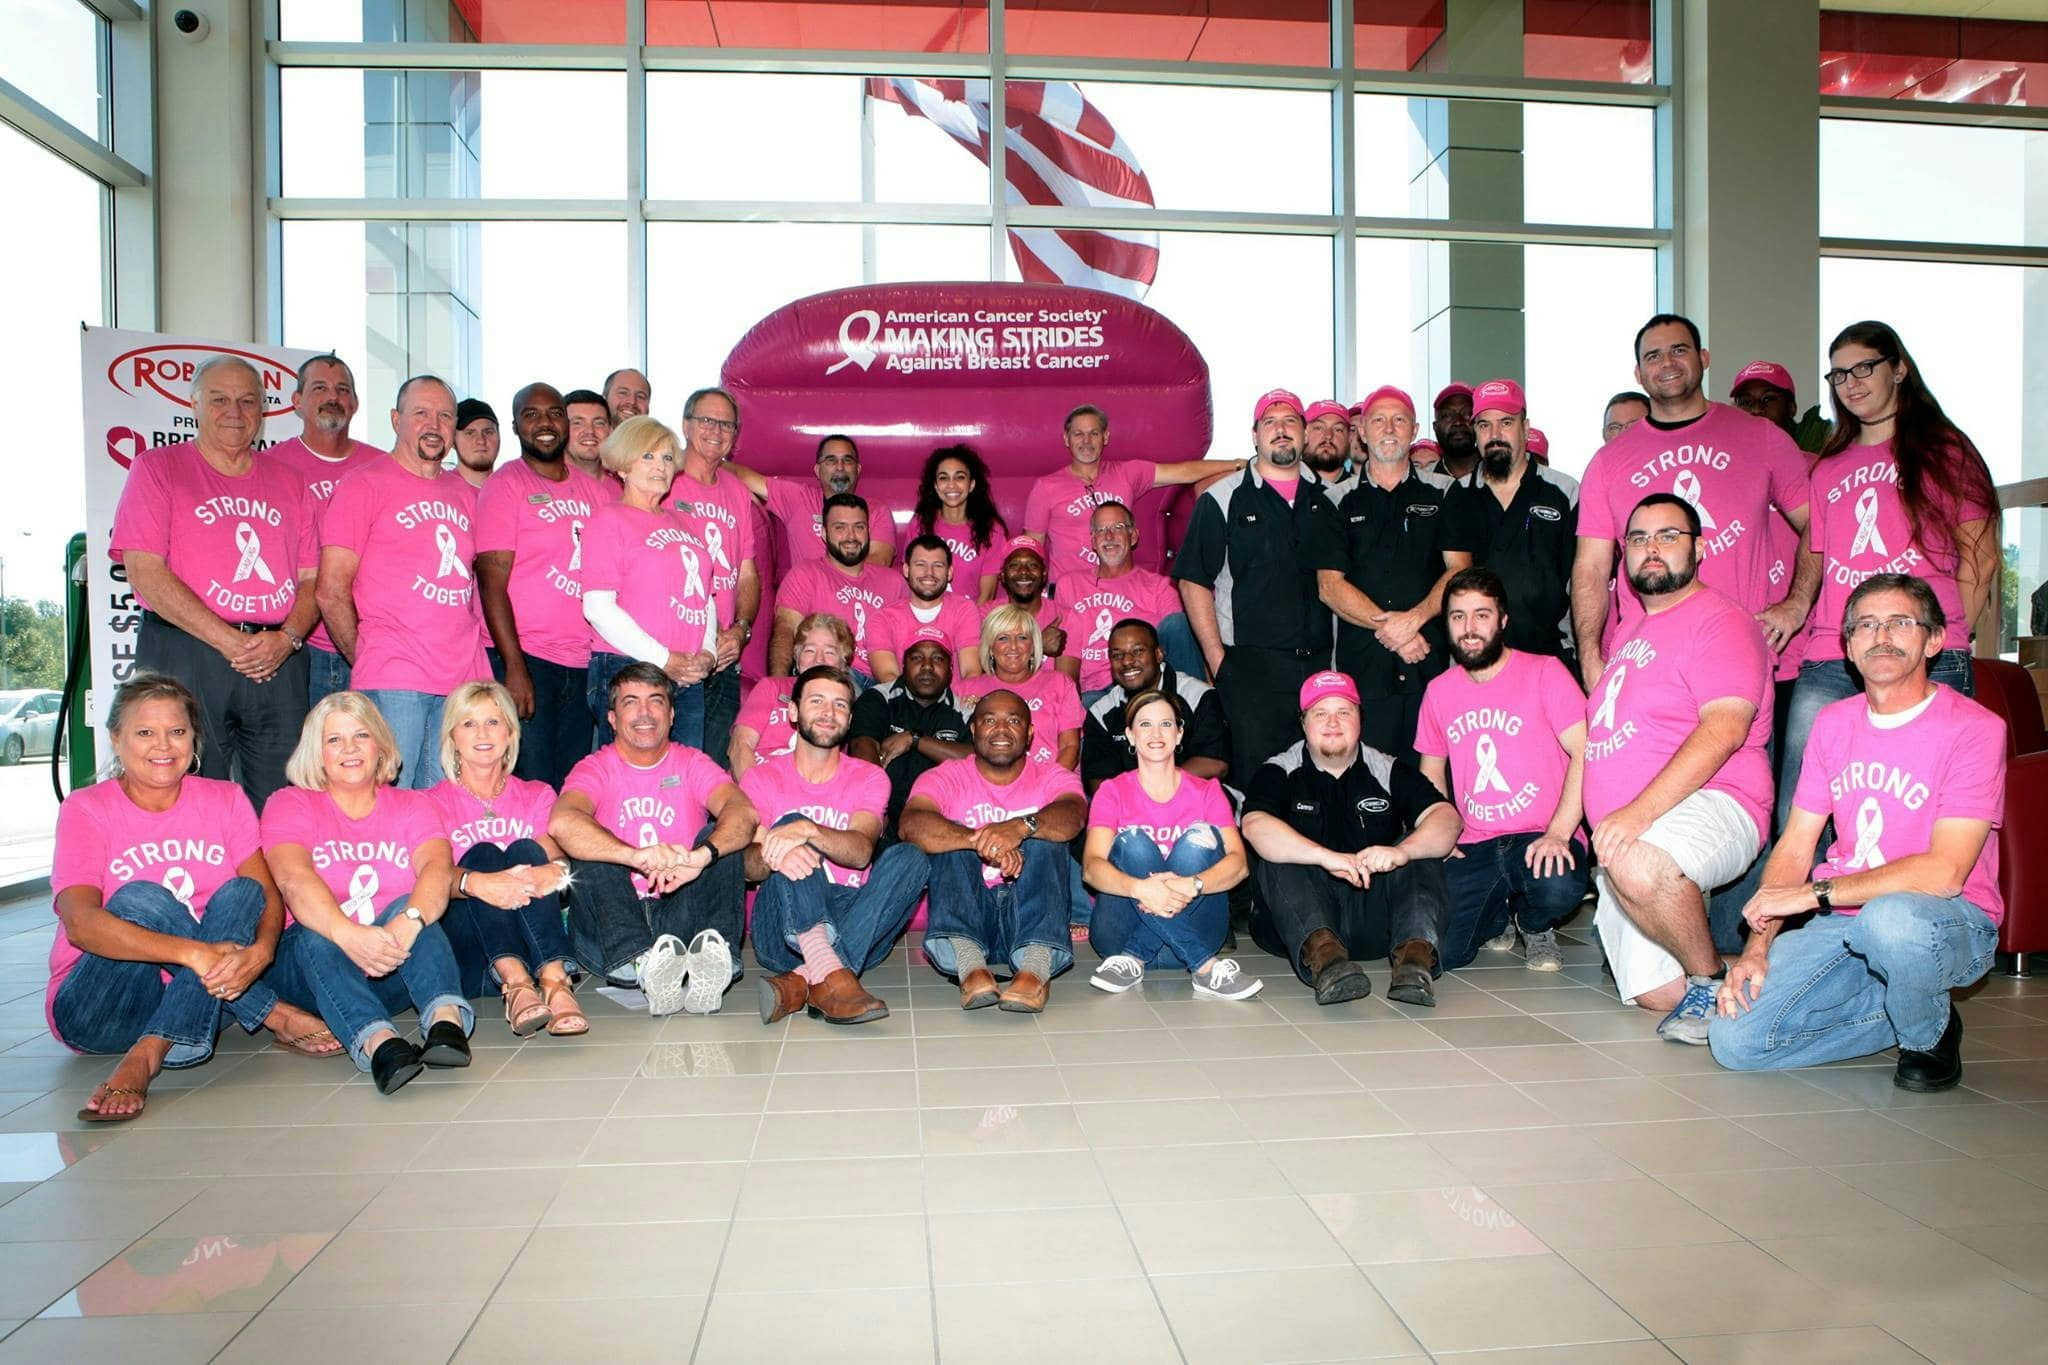 Robinson Toyota is Help Making Strides Against Breast Cancer!